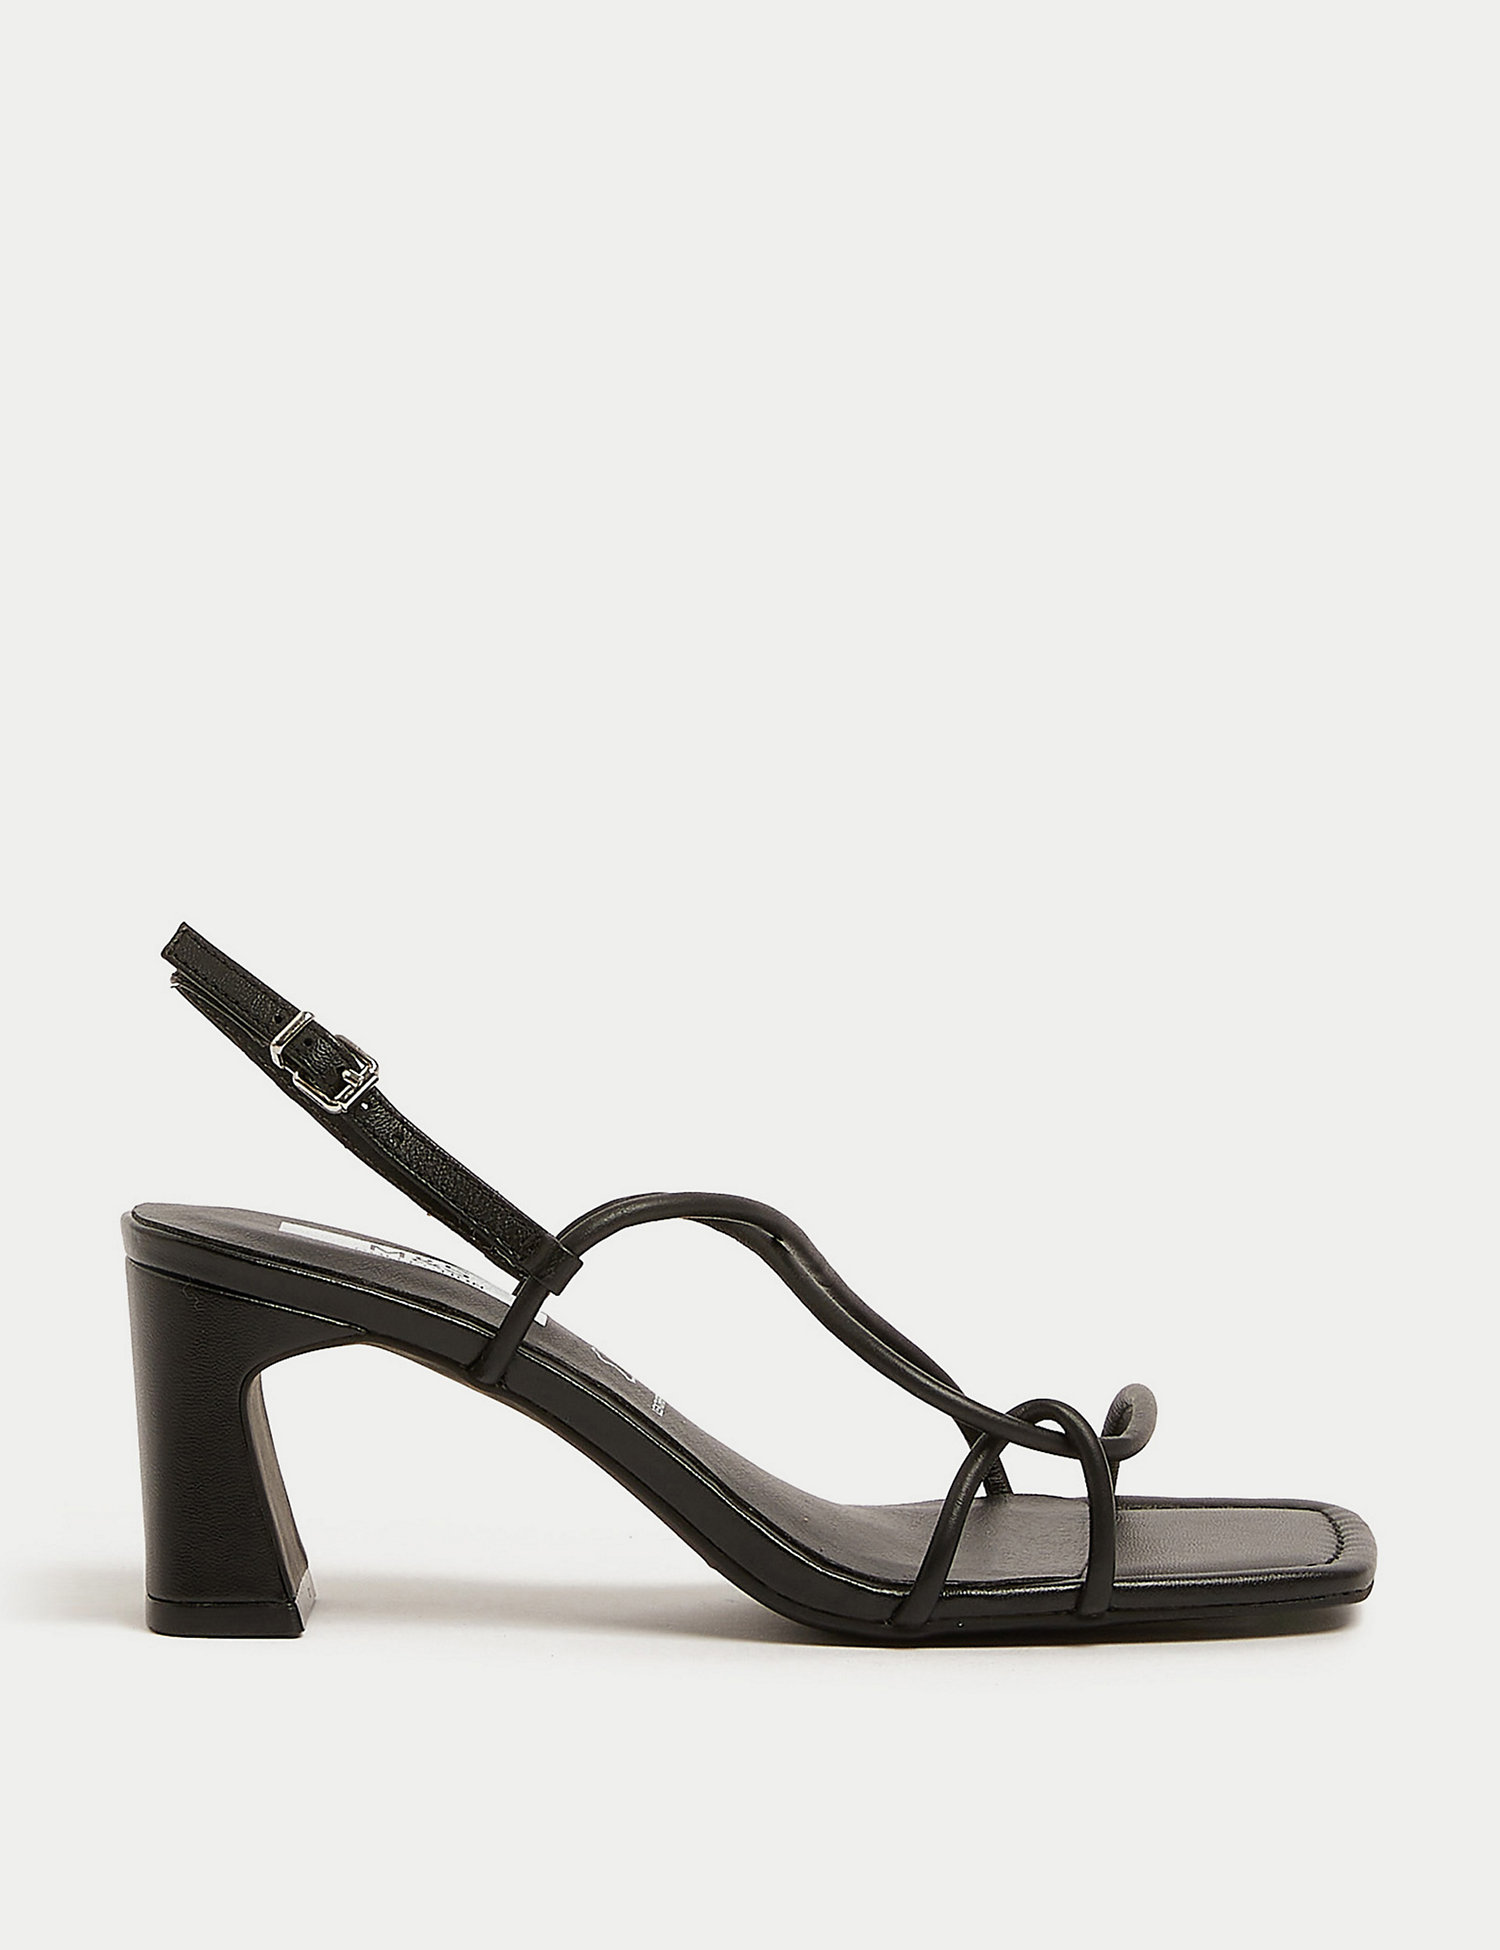 M&S Sandals Trends, Strappy Sandals